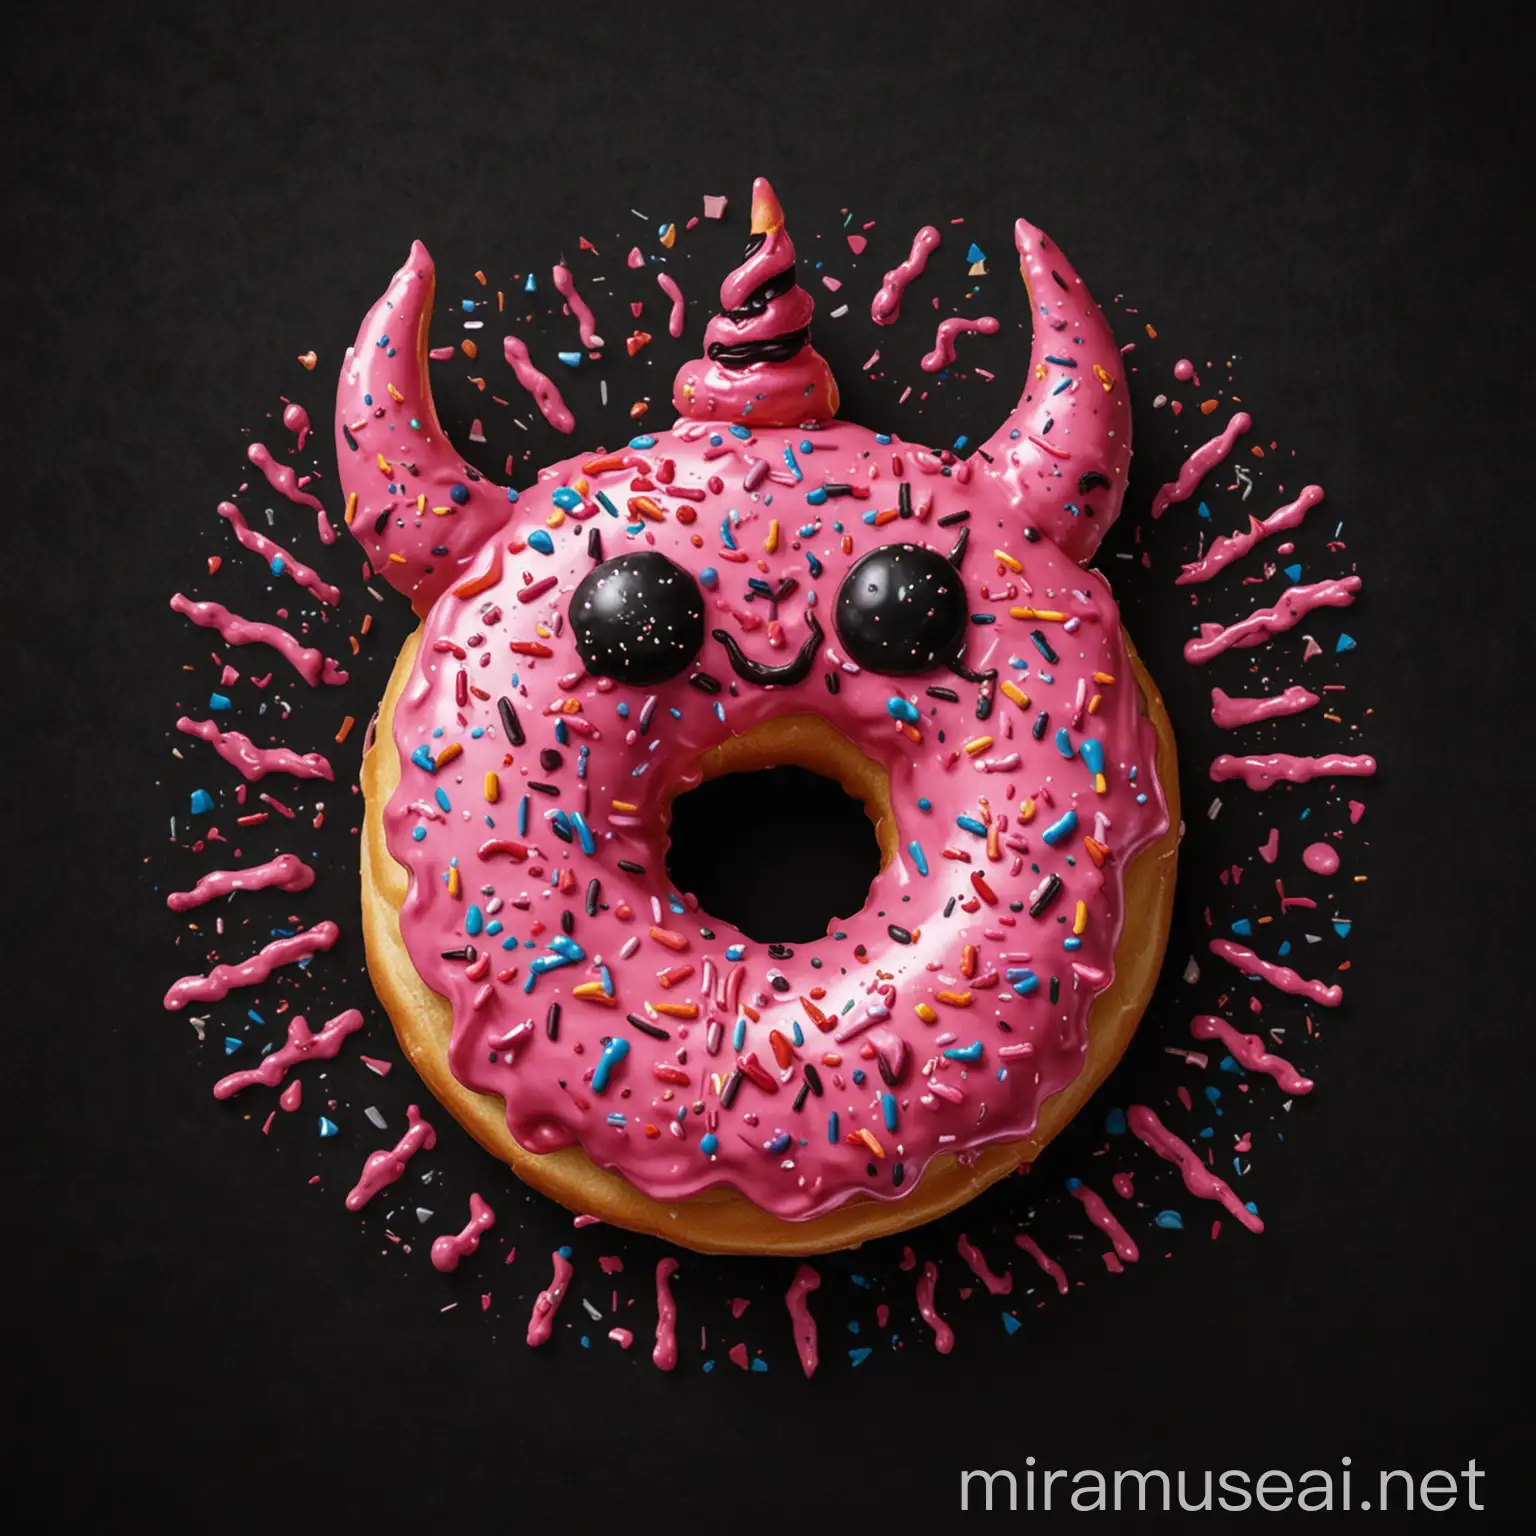 Make logo for a flag with a pink donut with sprinkles for a metal festival. With devil horns and a black background